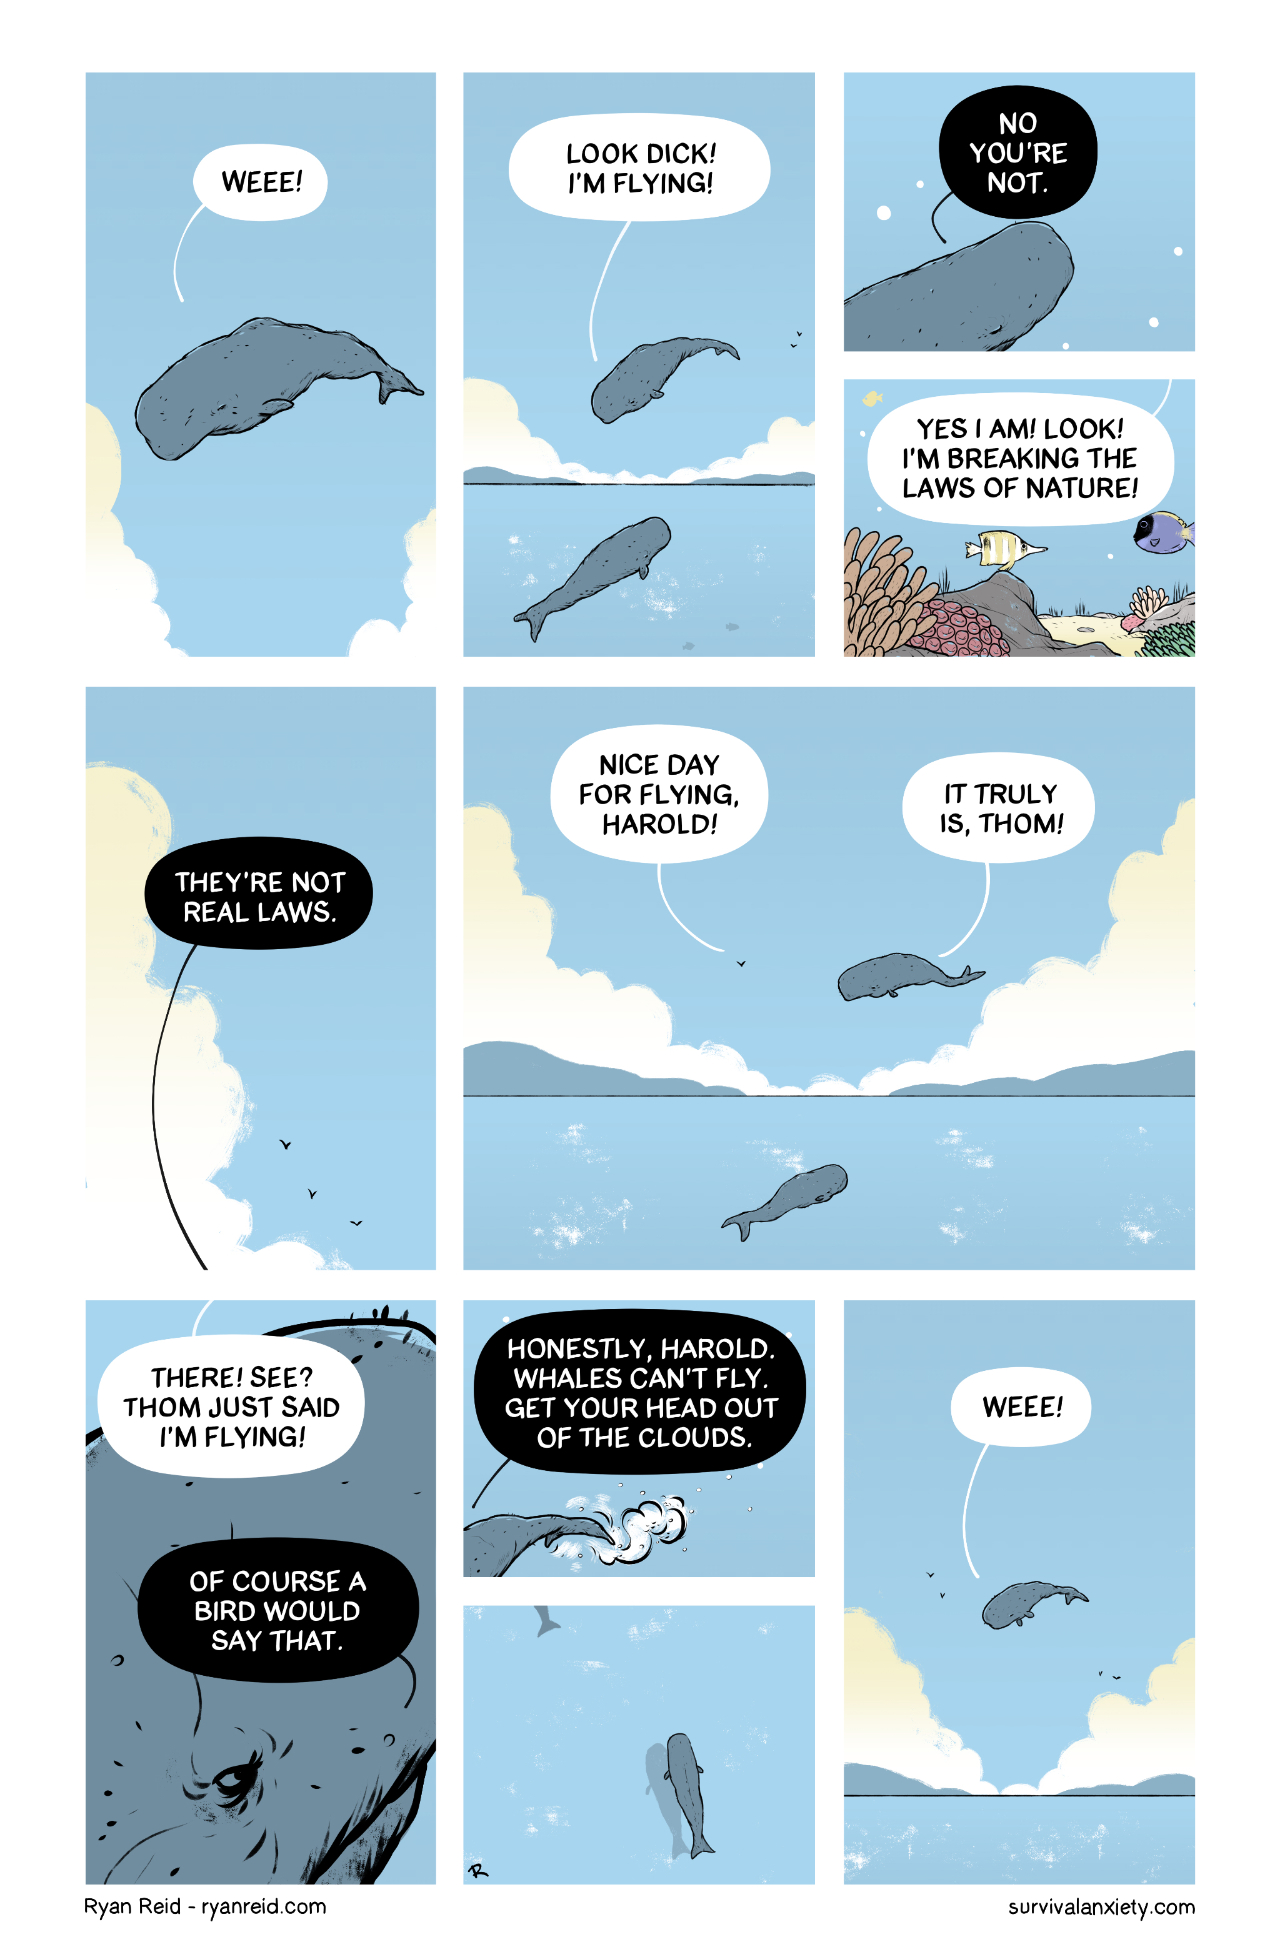 In this comic, Harold the whale can fly!